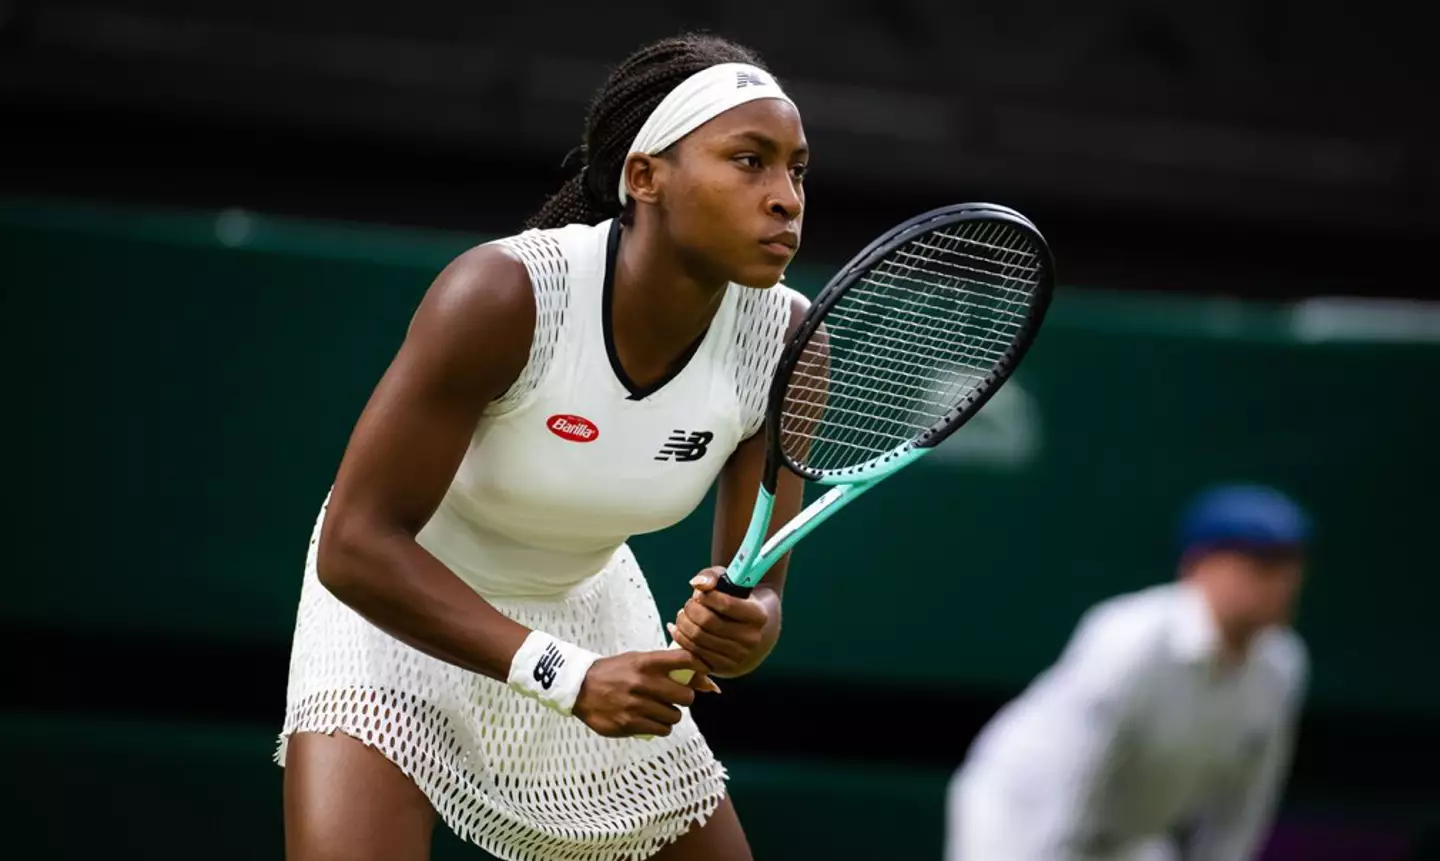 Coco Gauff has opened up about her experience competing while on her period.